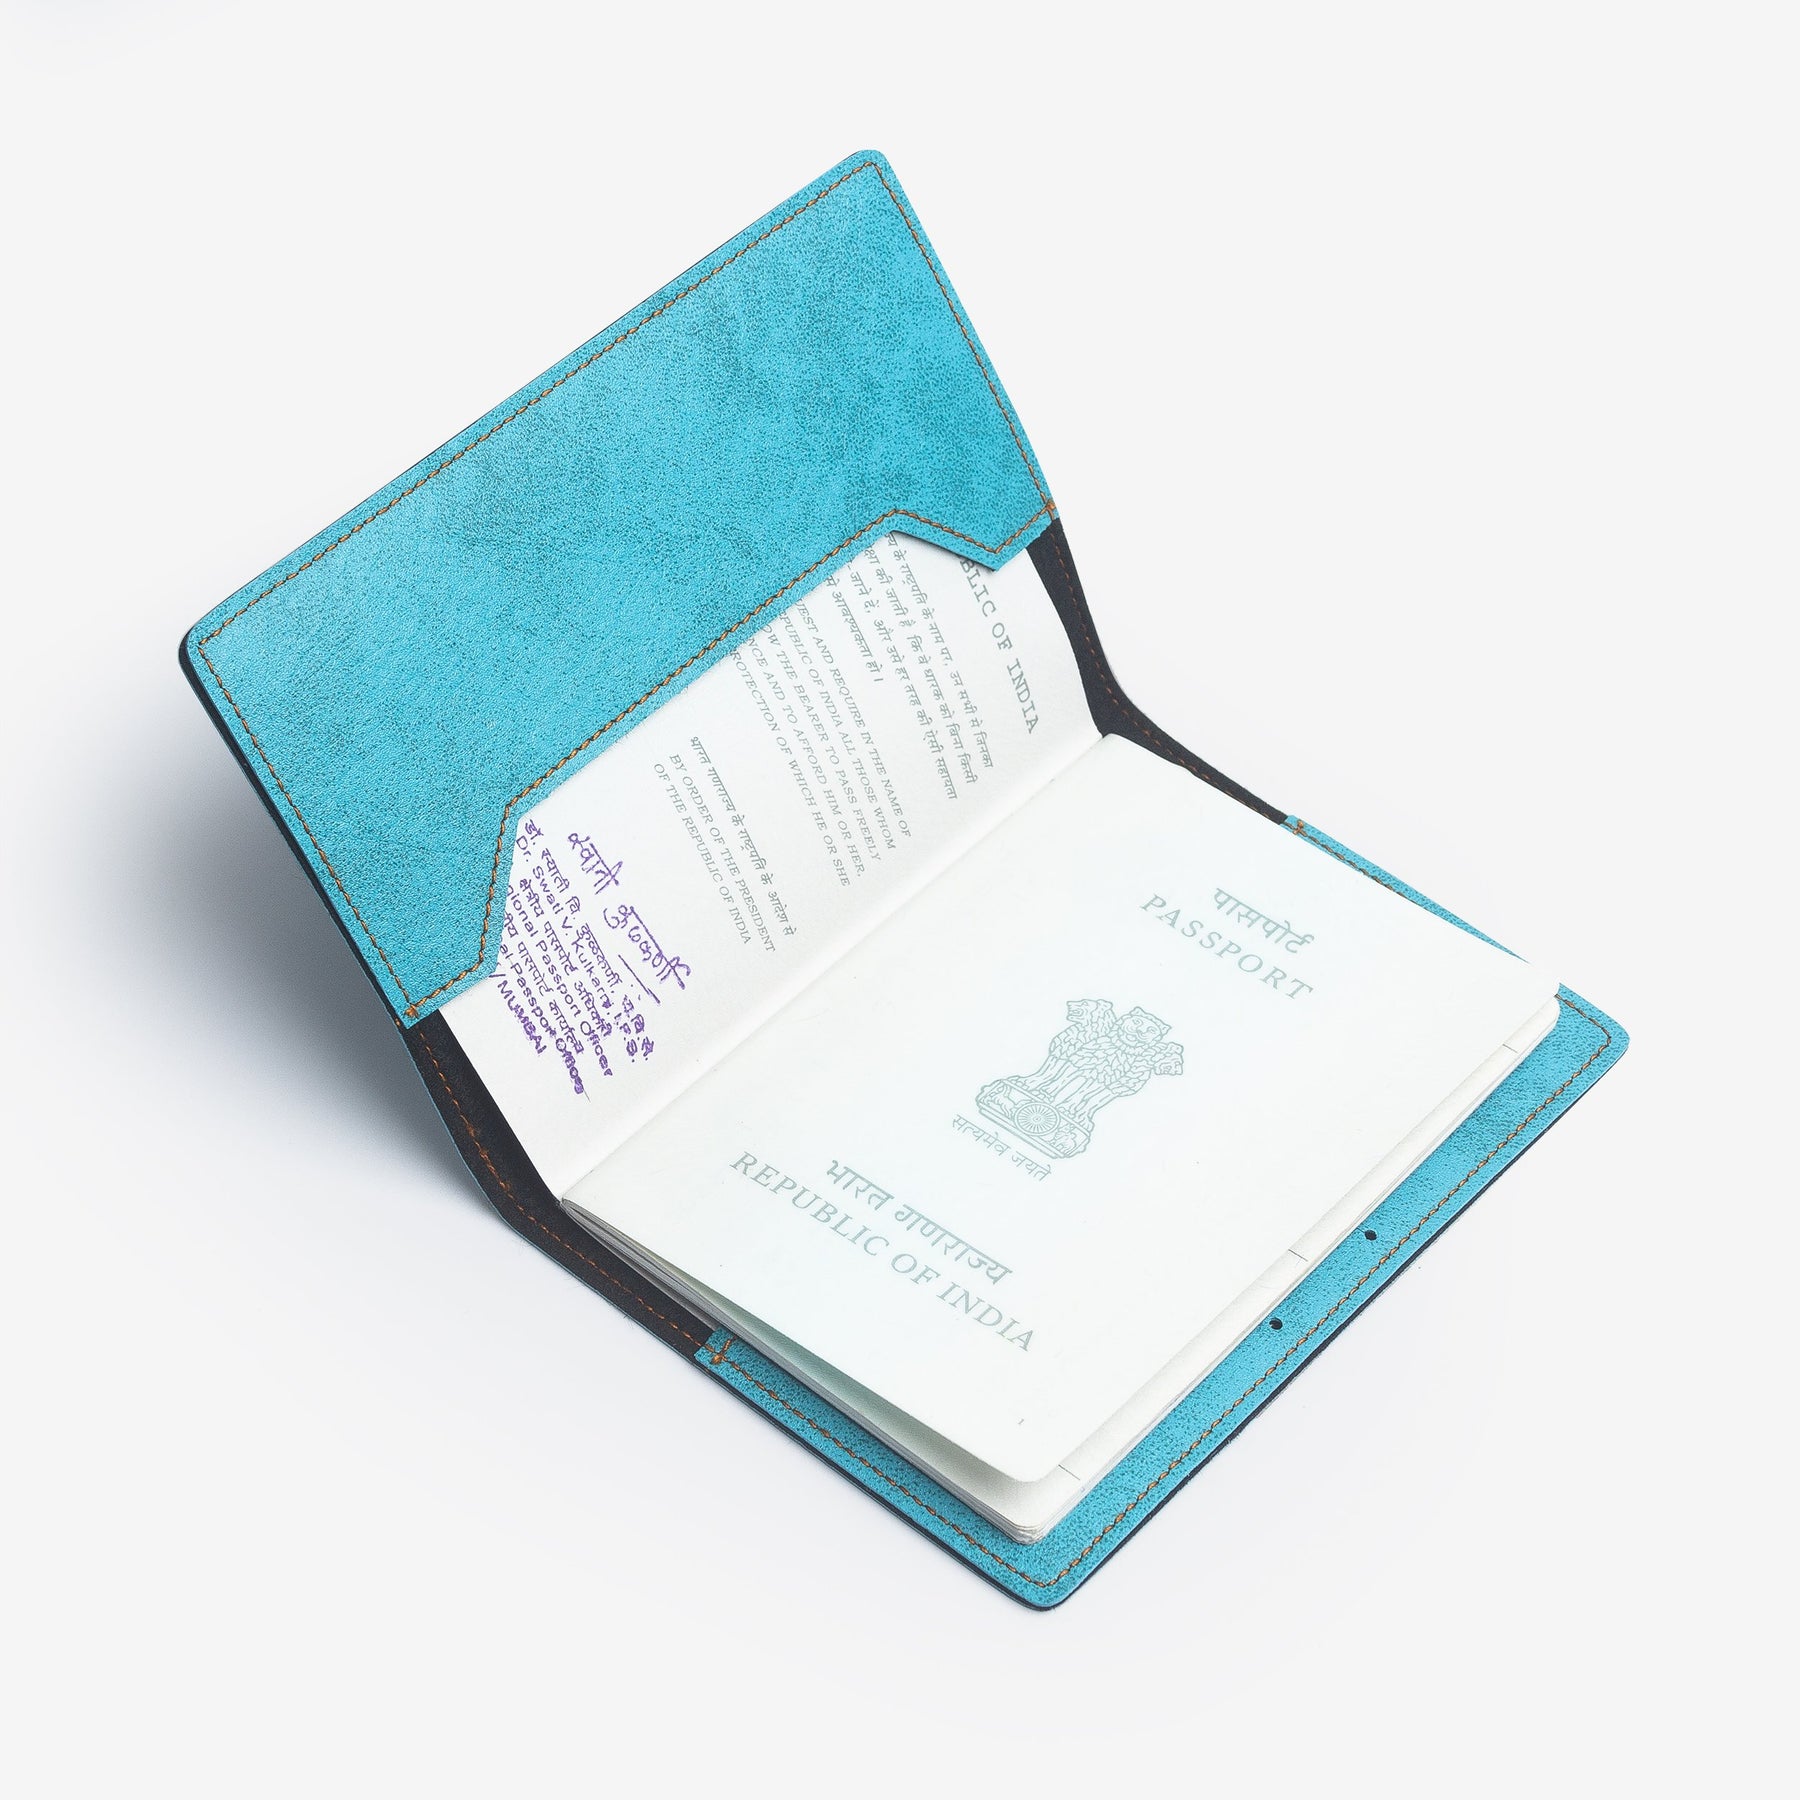 The Messy Corner Passport Cover Personalized Passport Cover - Light Blue